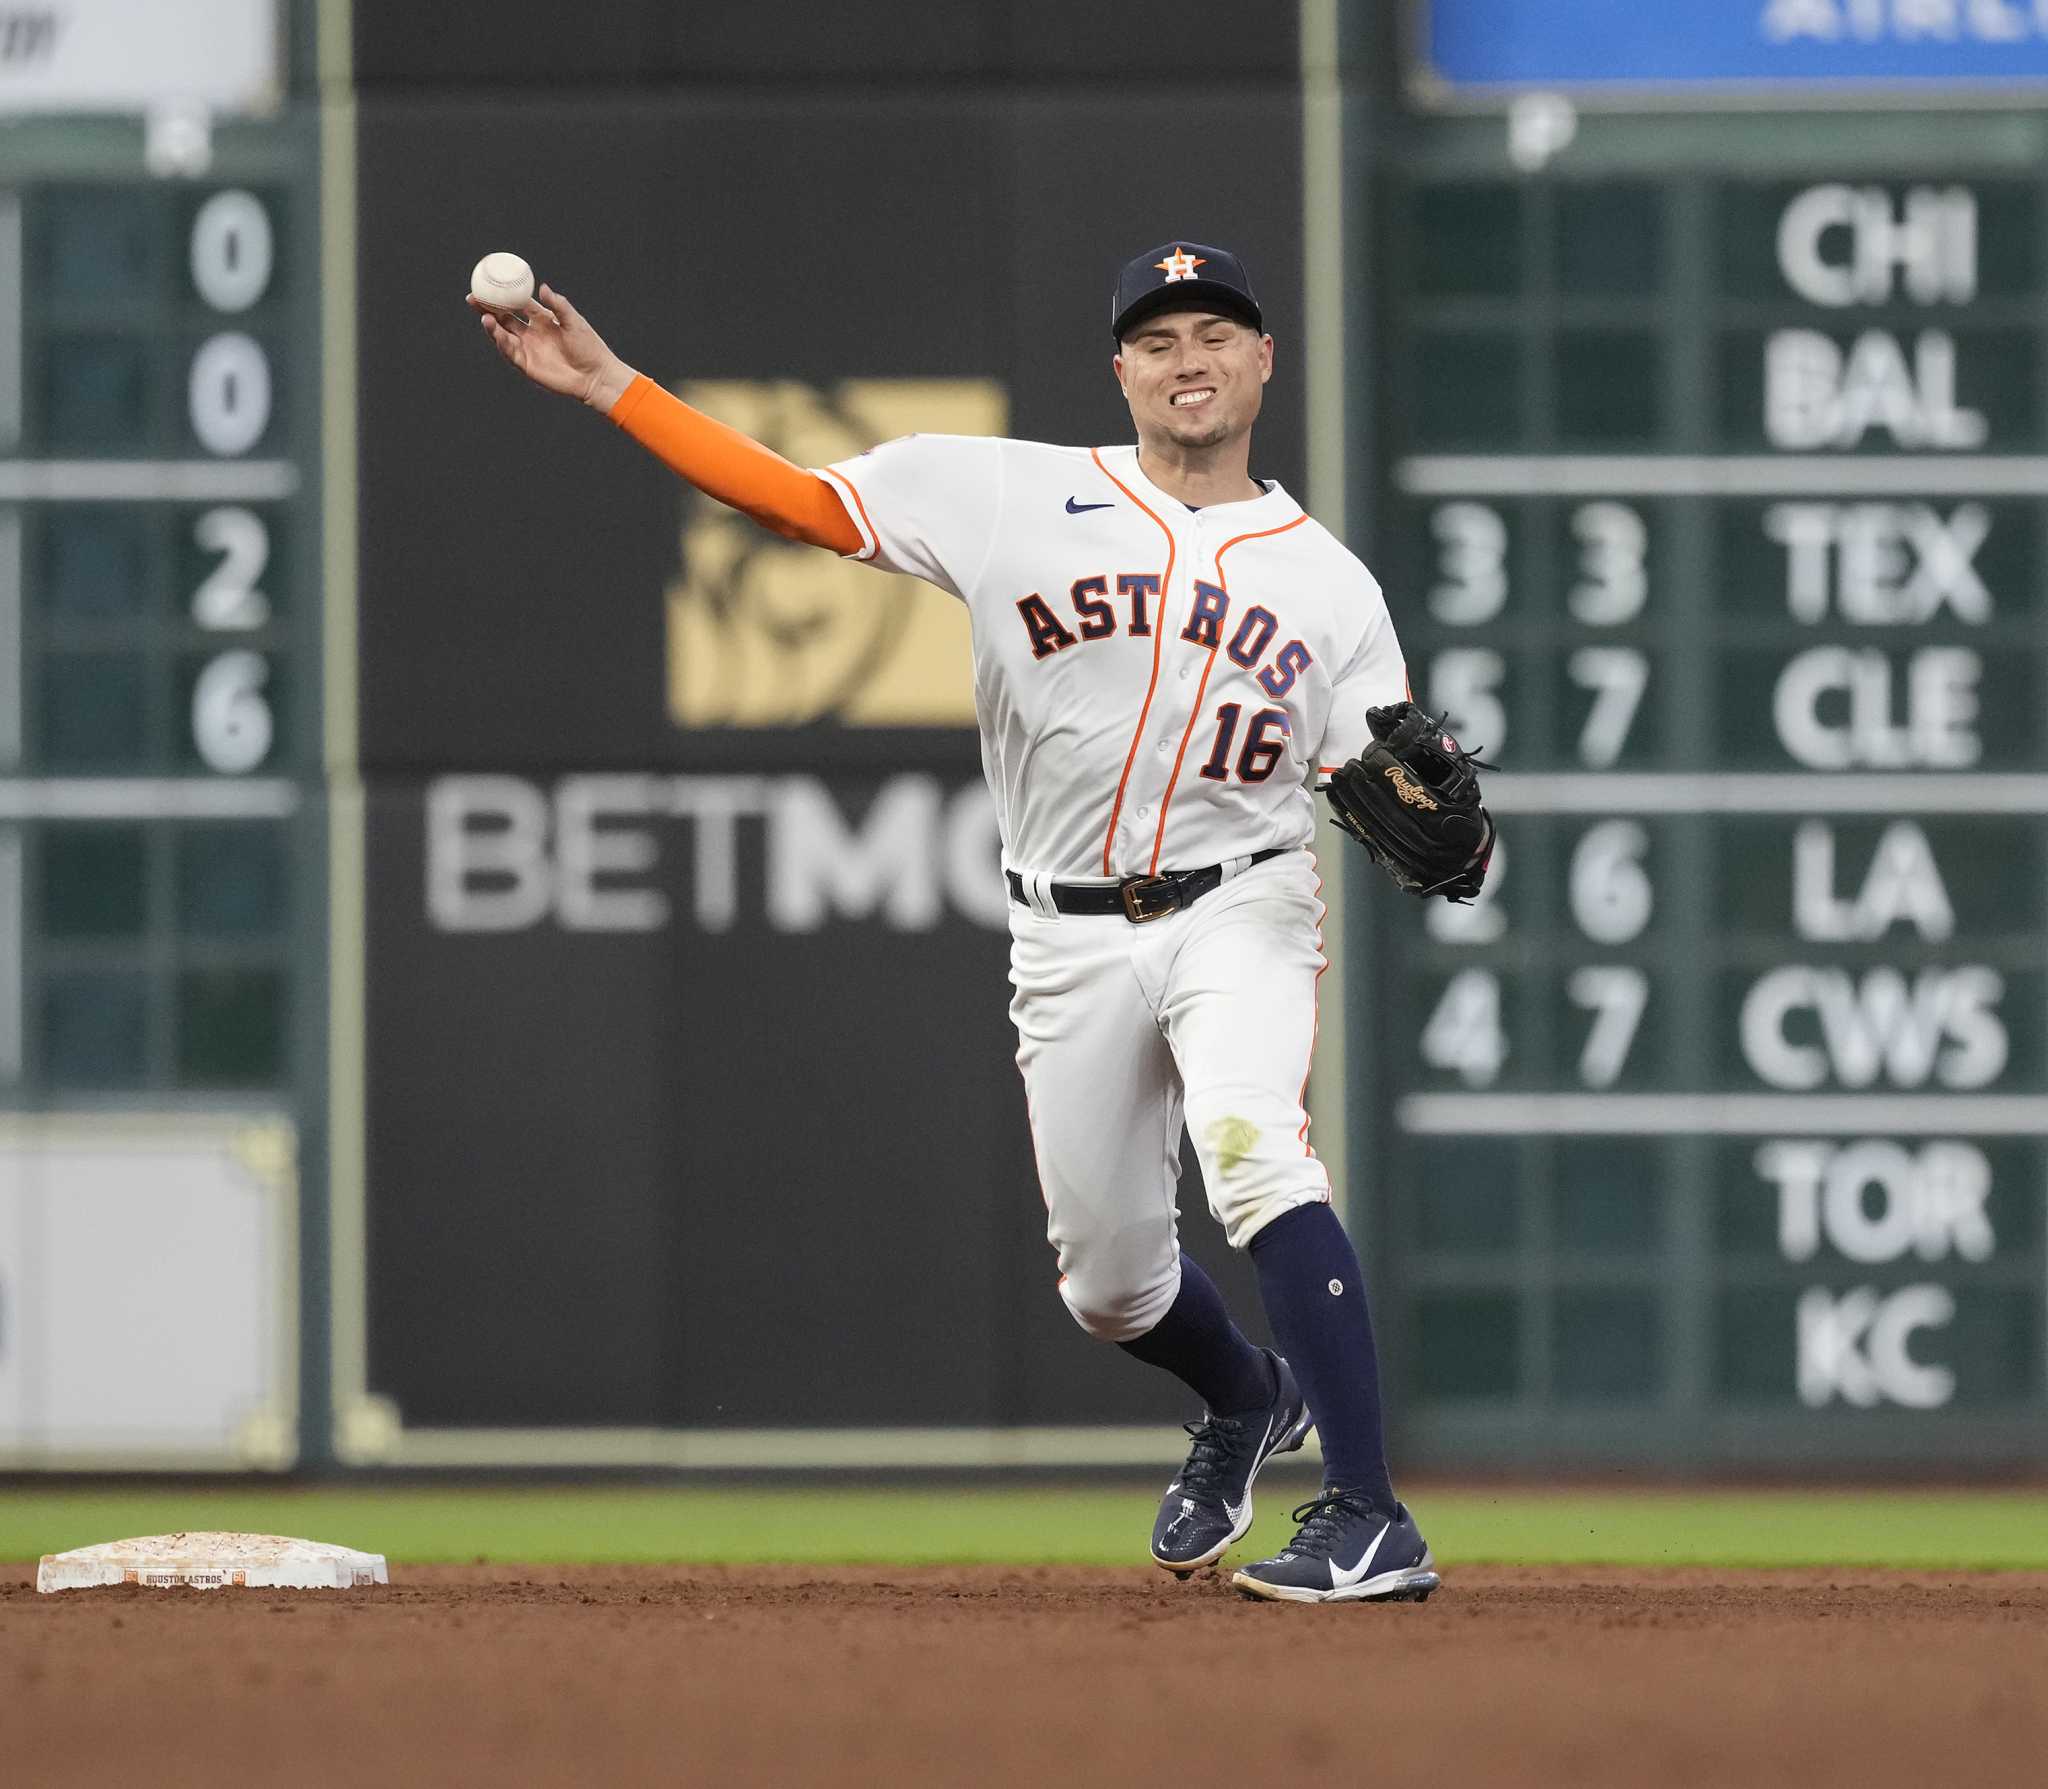 Houston Astros: Aledmys Diaz exits game with injury after catch